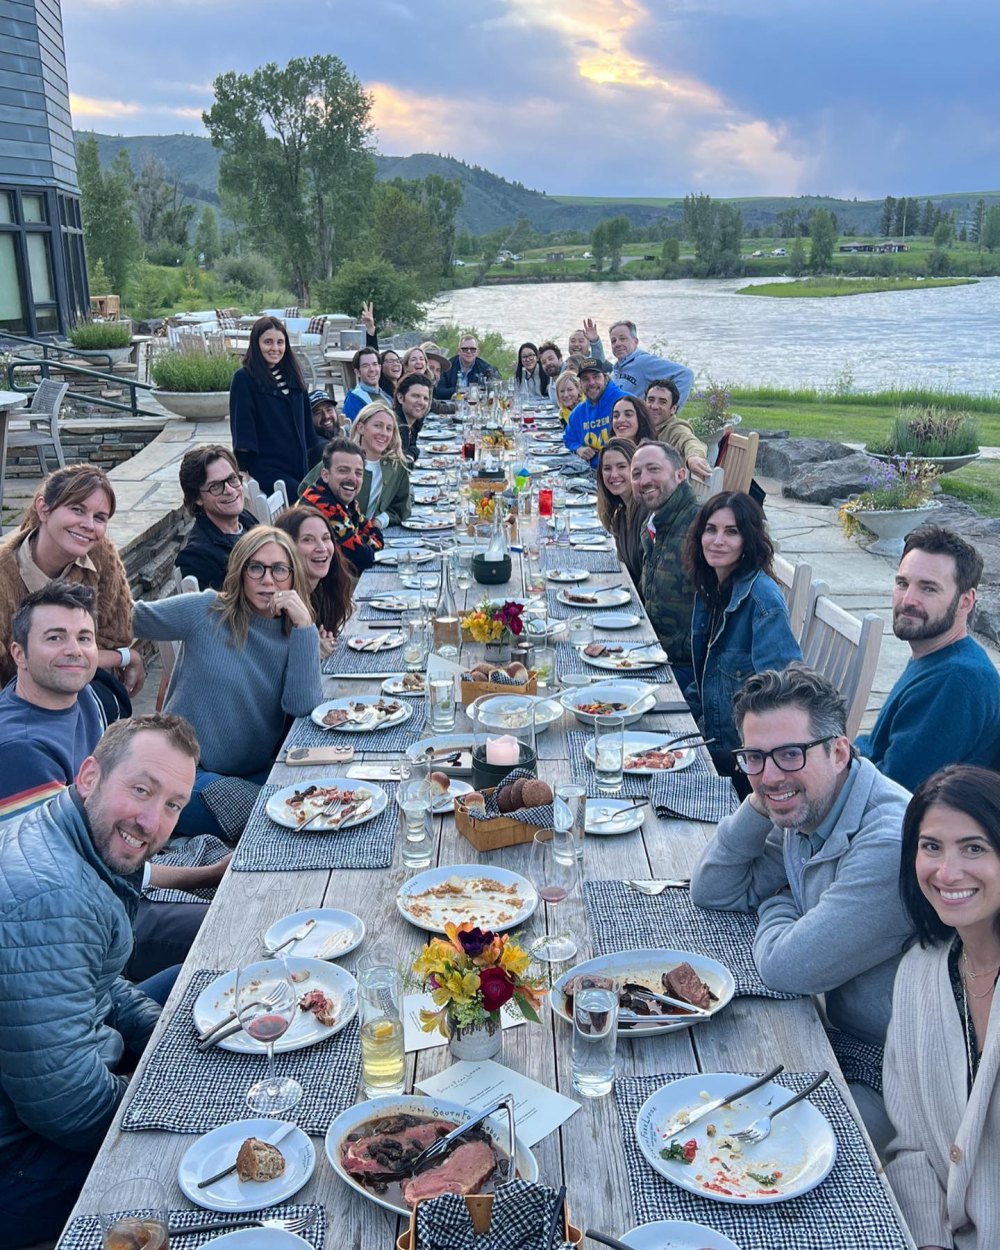 Kristen Bell and Dax Shepard Enjoy Star-Studded Idaho Dinner: Find Out Which Celebrity Pals Attended